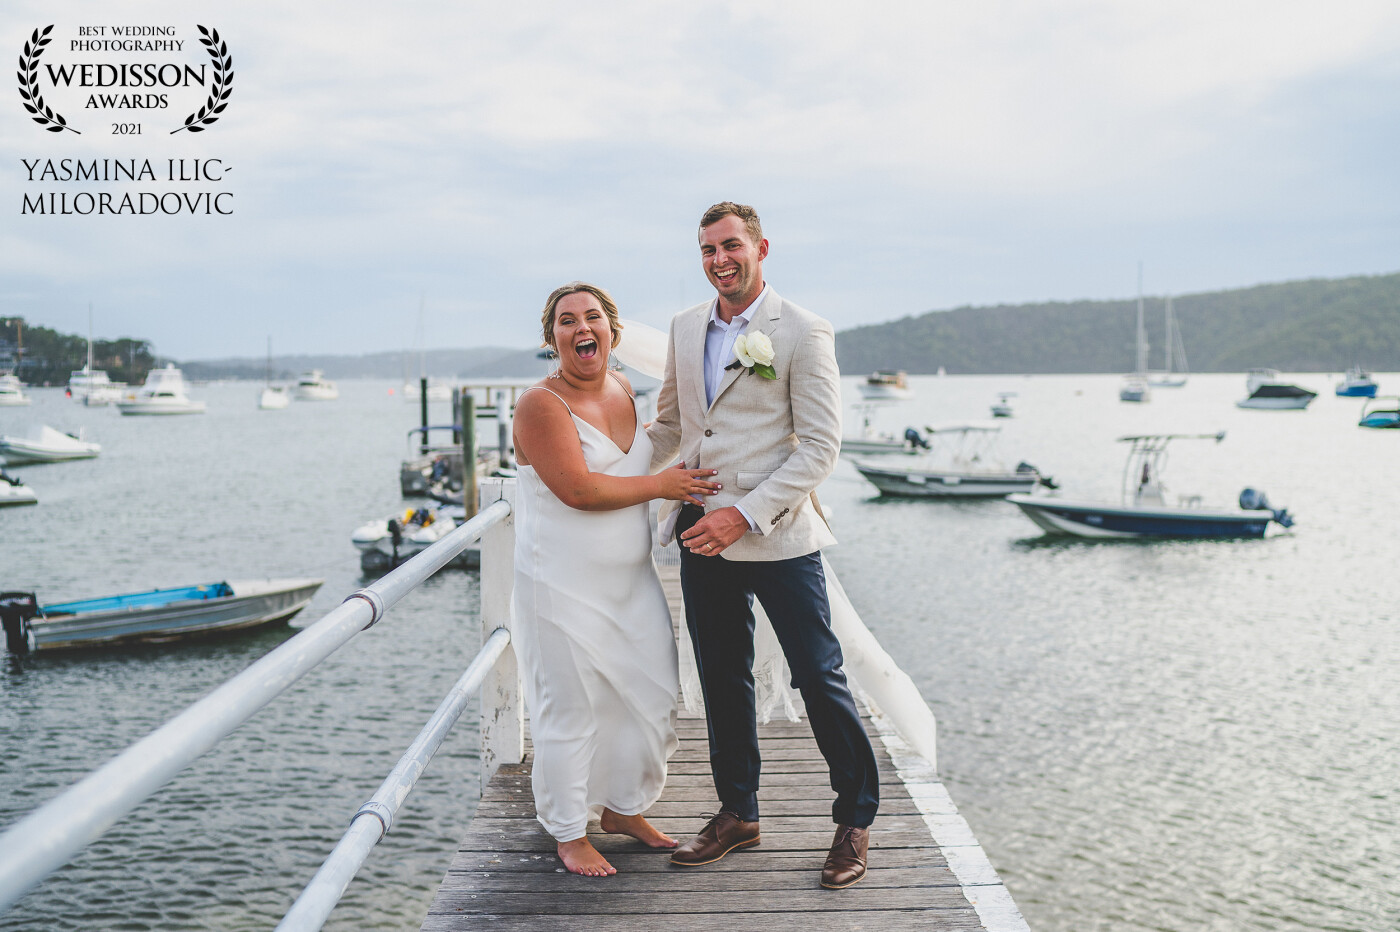 Dusk, water, wind, bare feet, love and laughter. What more could you want on your wedding day? <br />
<br />
Taylor and Sam married at Palm Beach on the Northern Beaches of Sydney, Australia. There was no stopping these two!